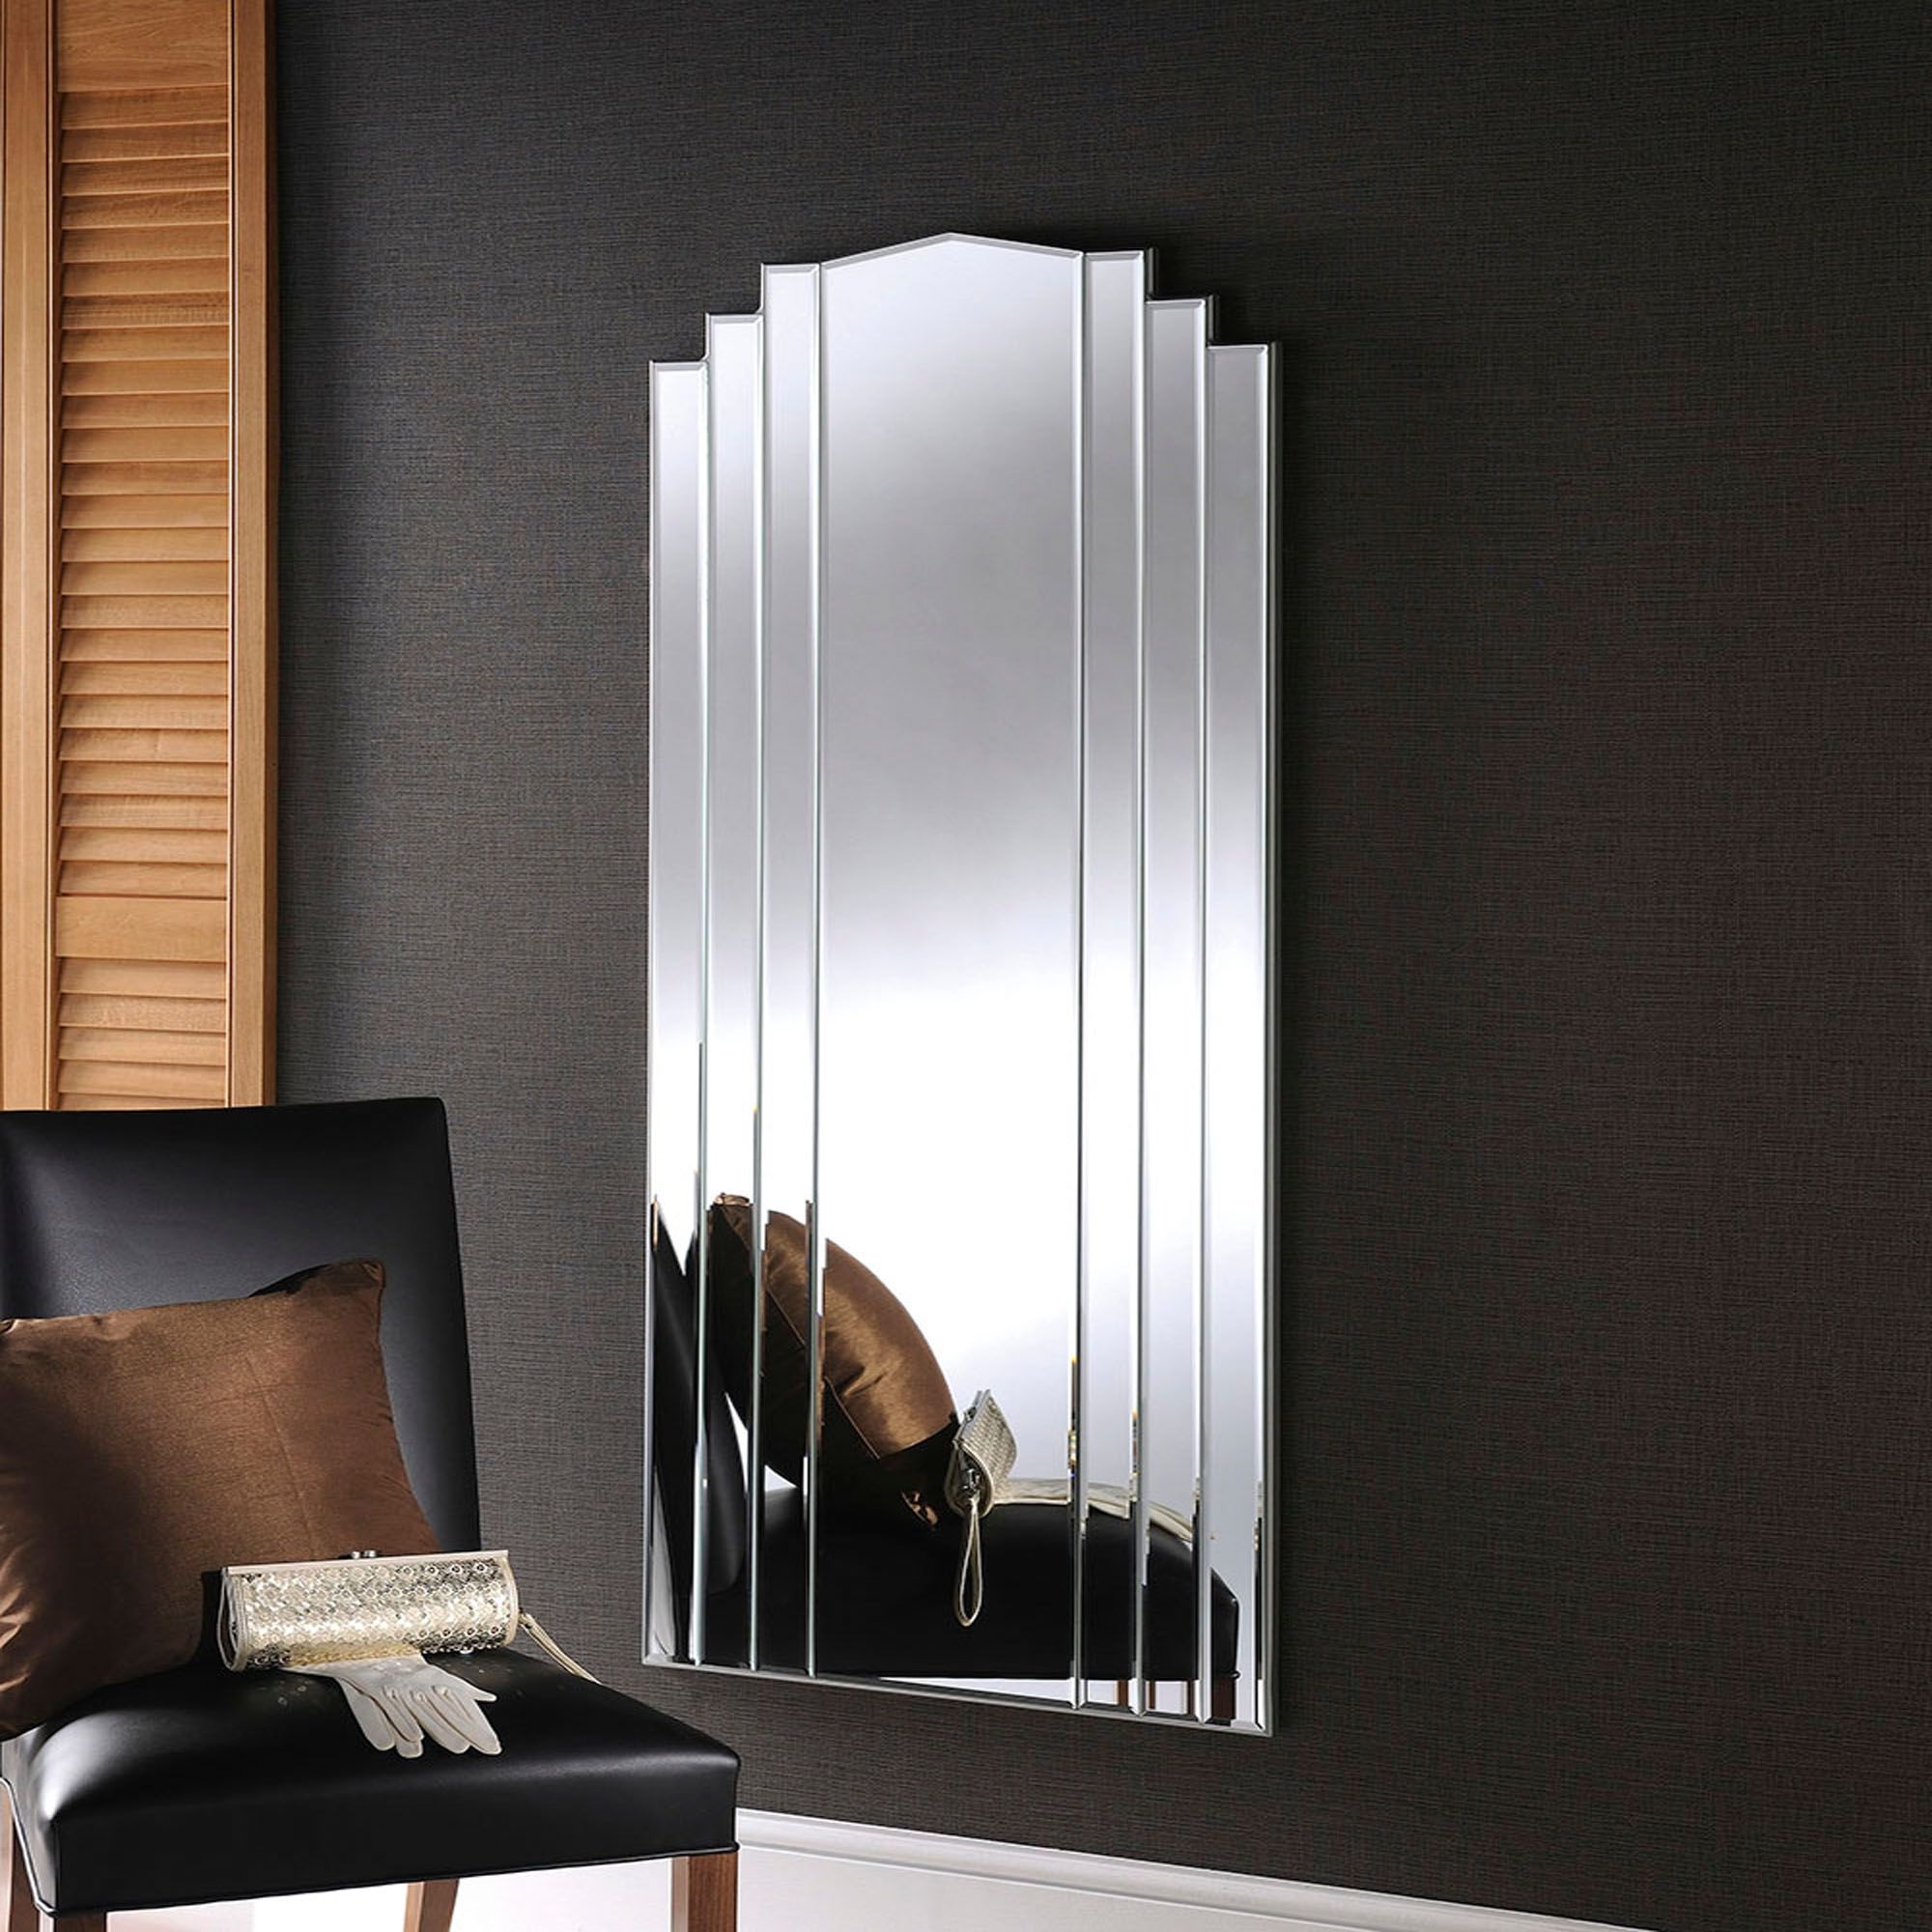 2019 Full Wall Mirrors For Full Length Venetian Wall Mirror (View 12 of 20)